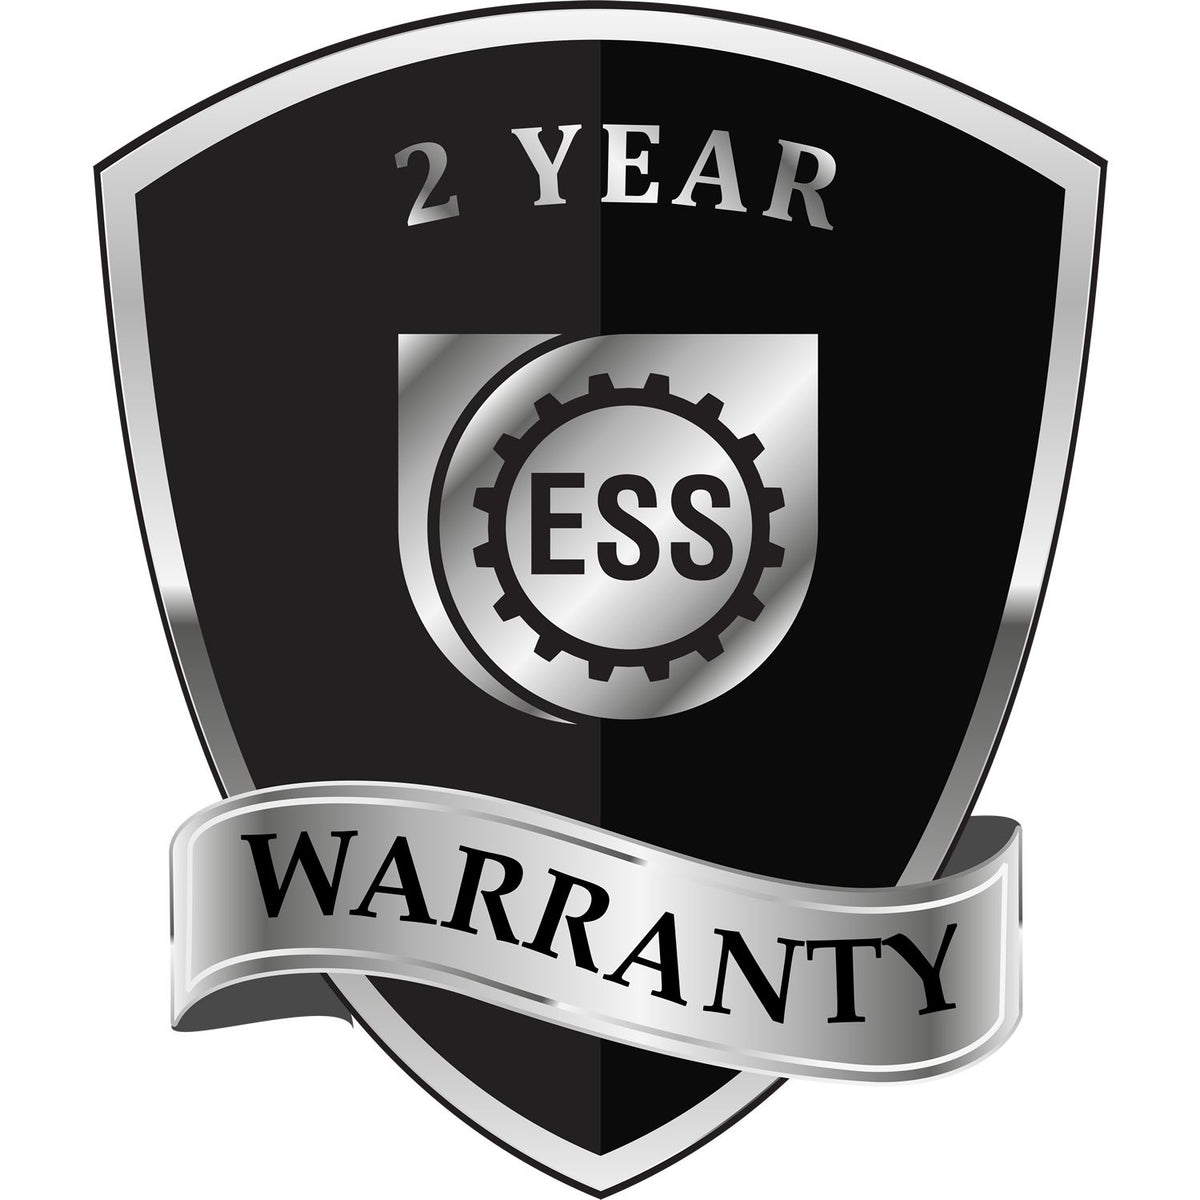 A badge or emblem showing a warranty icon for the Heavy Duty Cast Iron Rhode Island Architect Embosser